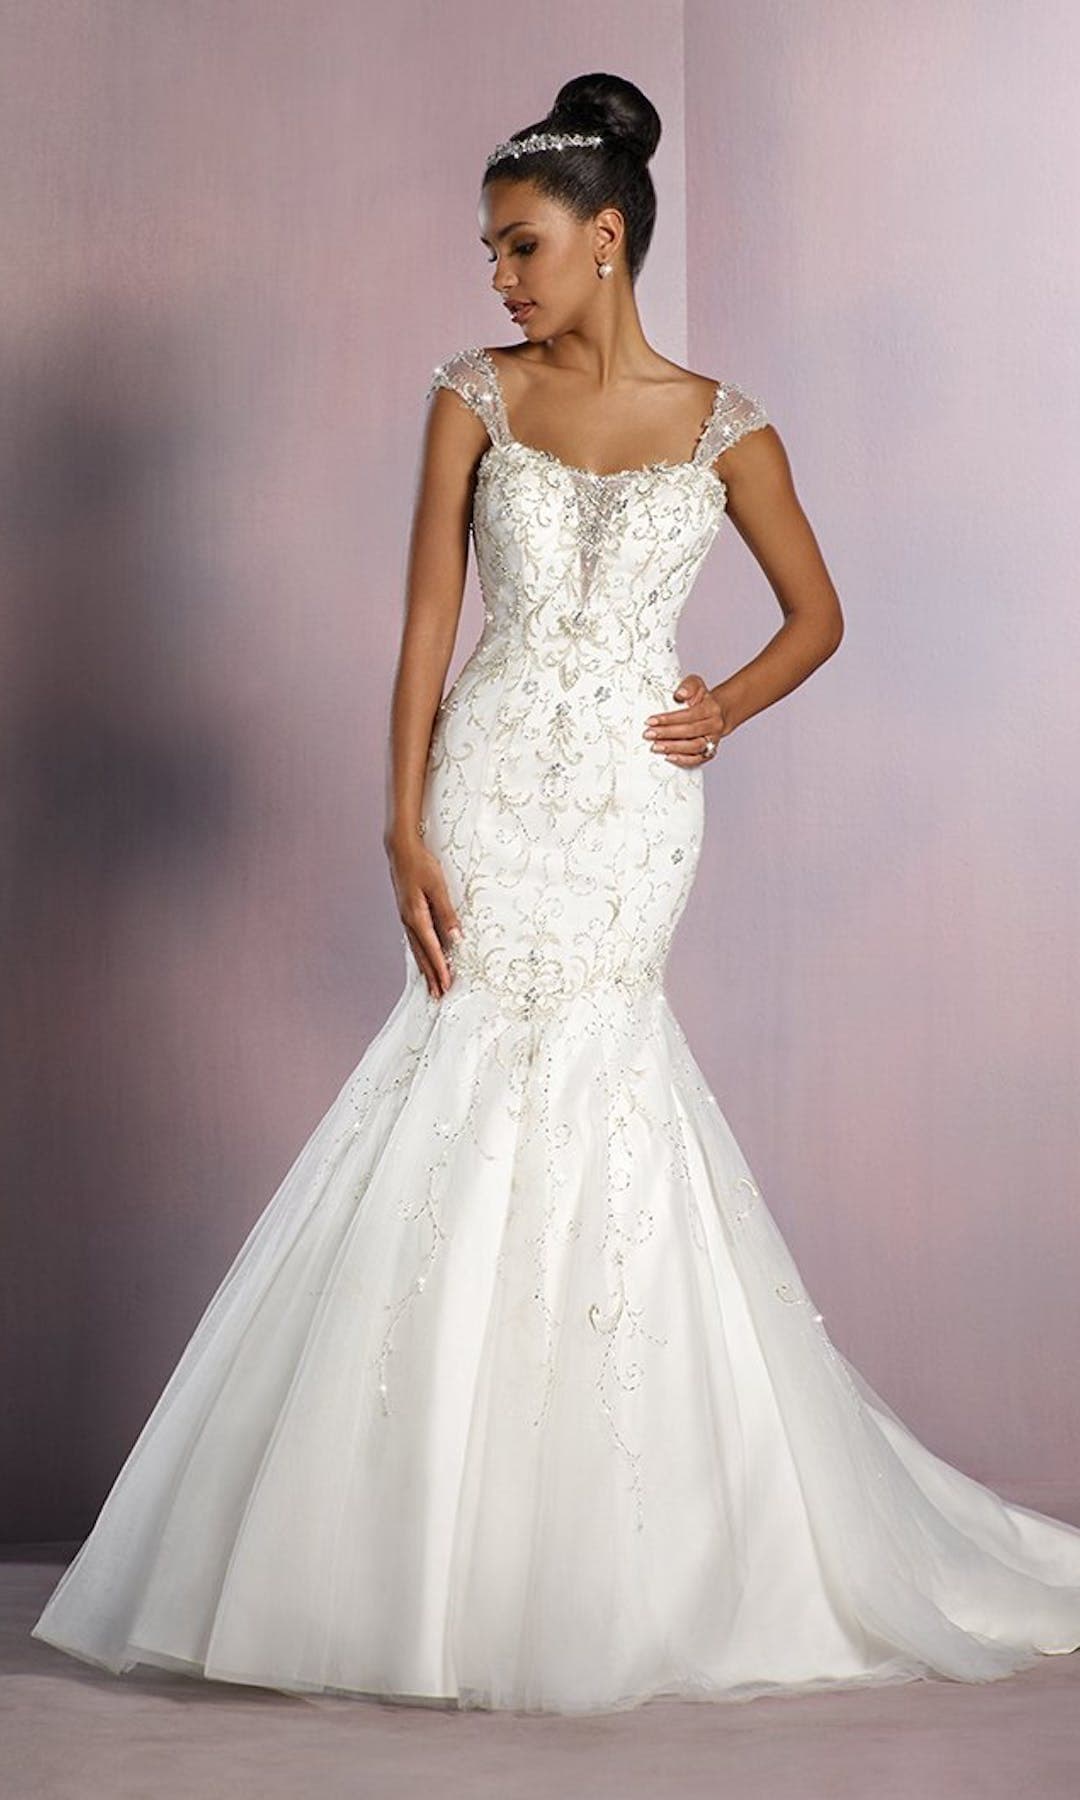 [For Rent ONLY] Tiana Disney Fairy Tale Wedding Dress in Ivory (Trampet) - AA253 - Blossom Wedding